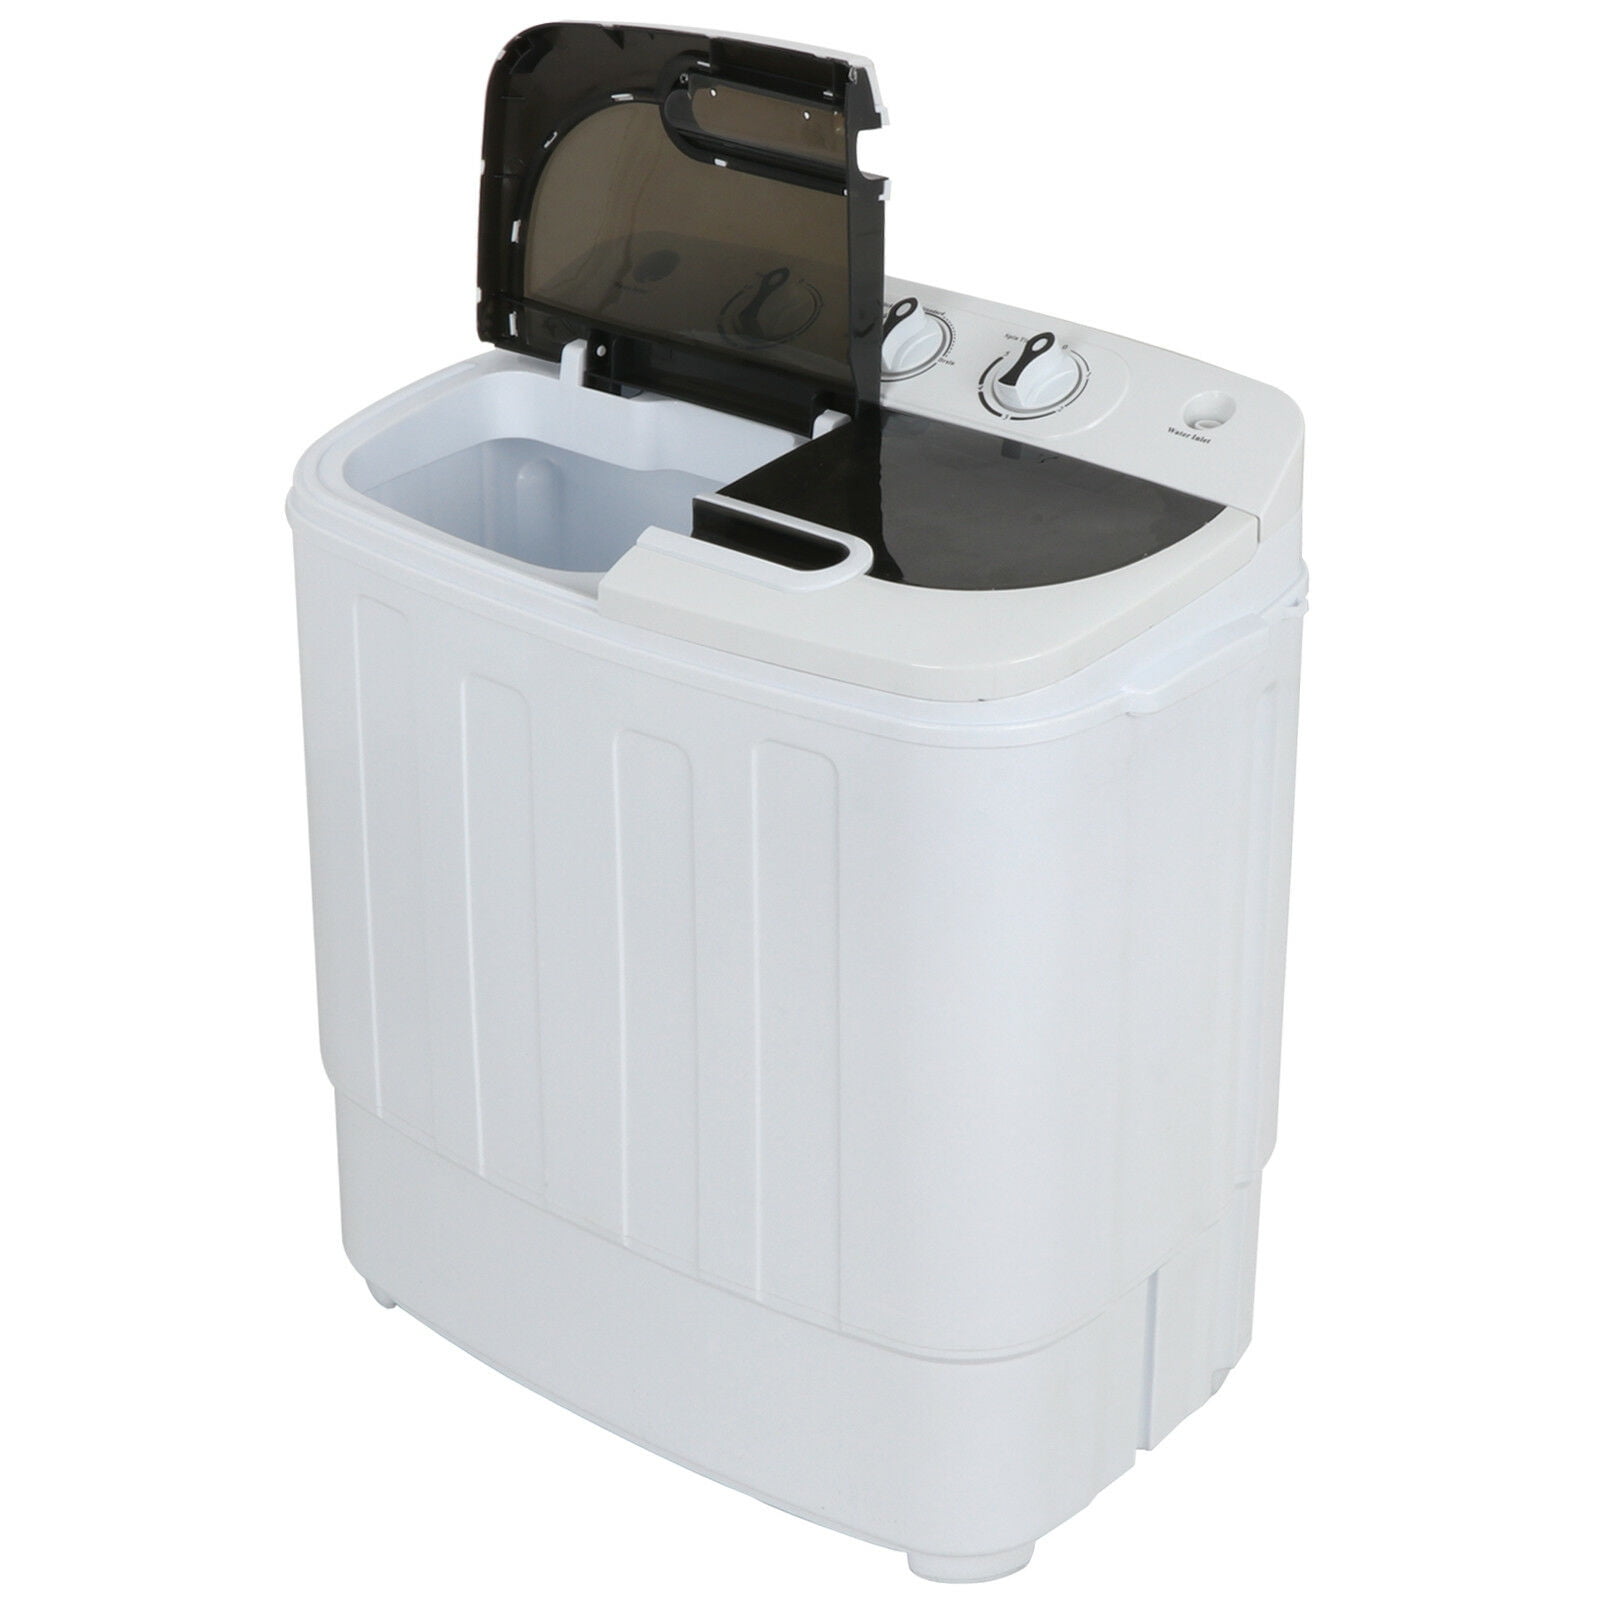 Compact Portable Washer & Dryer with Mini Washing Machine and Spin